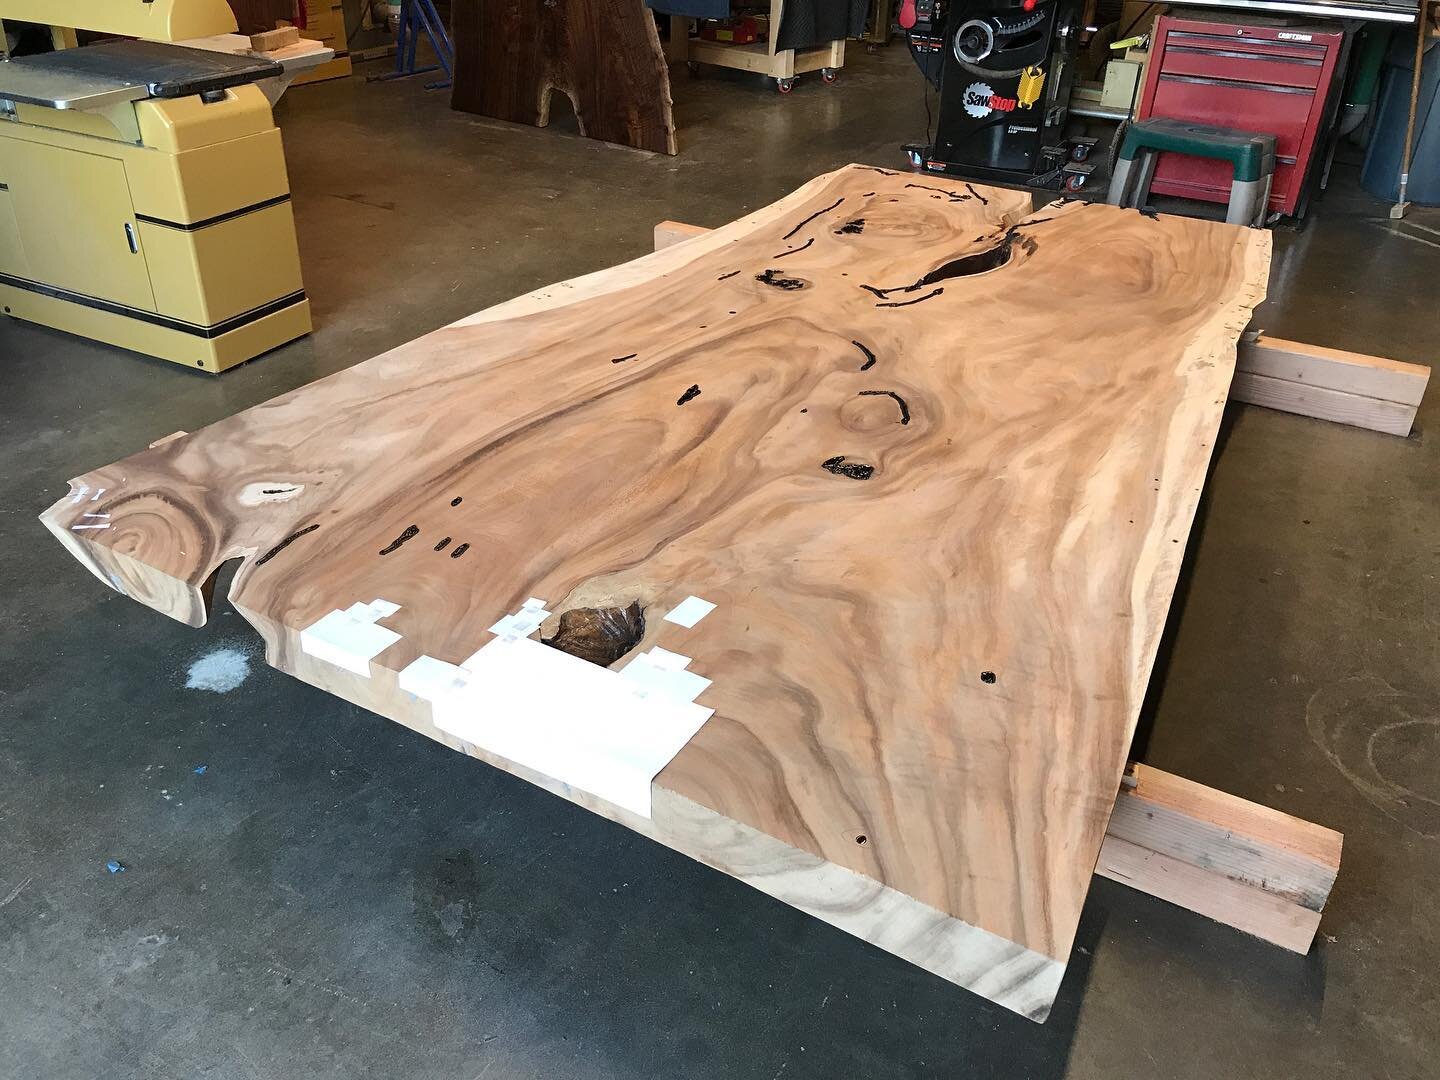 @bubingawoodworks  working on epoxy fills and a patching strategy for this slab table restoration. Thanks to @wood__walker at @lorenwoodbuilders for tips on how to caulk around the voids to contain the epoxy.

#slabtable #furnituredesign #liveedgefur